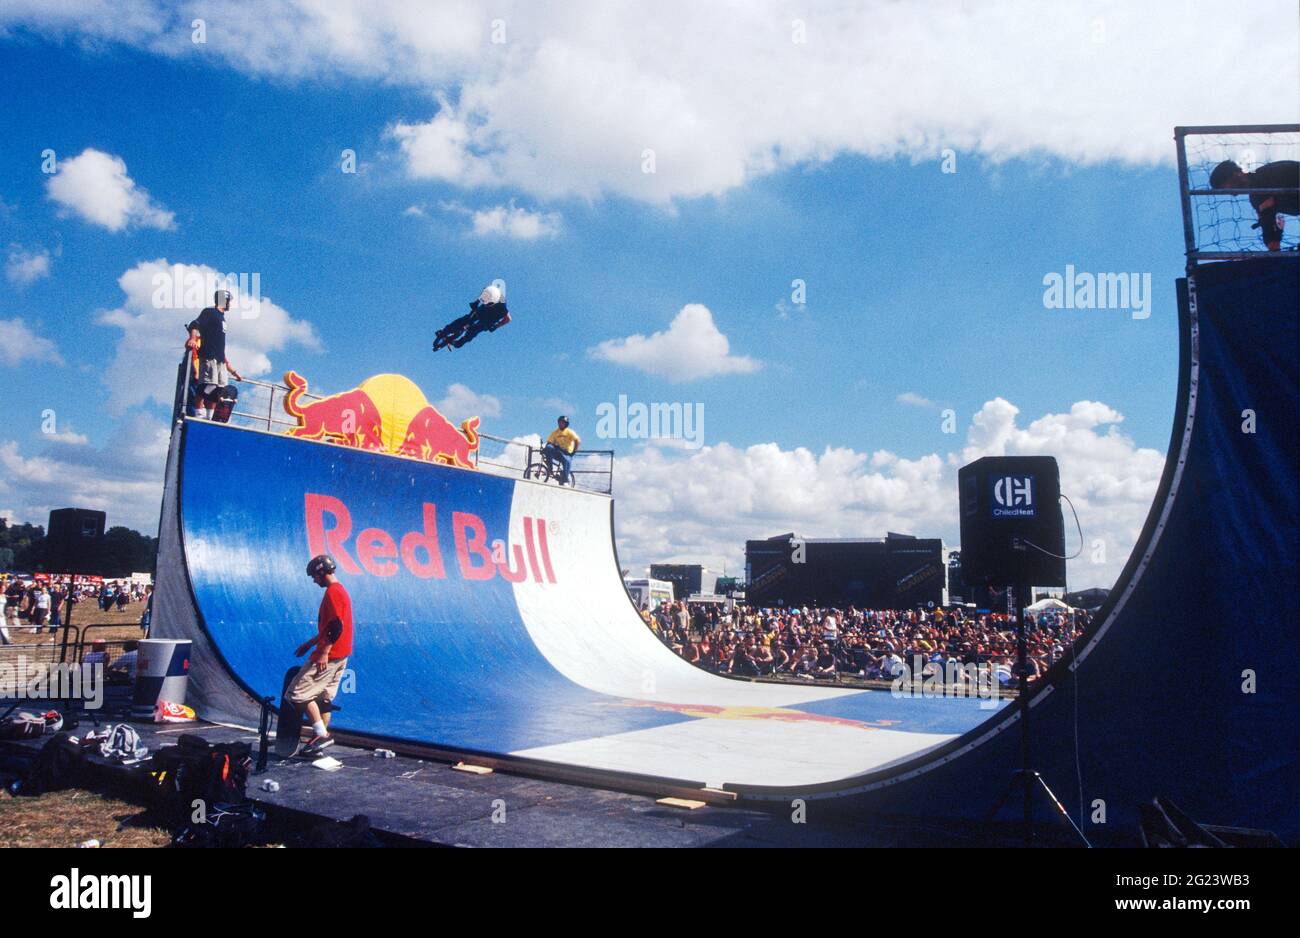 The Red Bull skateboard half at the Reading Festival 2002 - Alamy